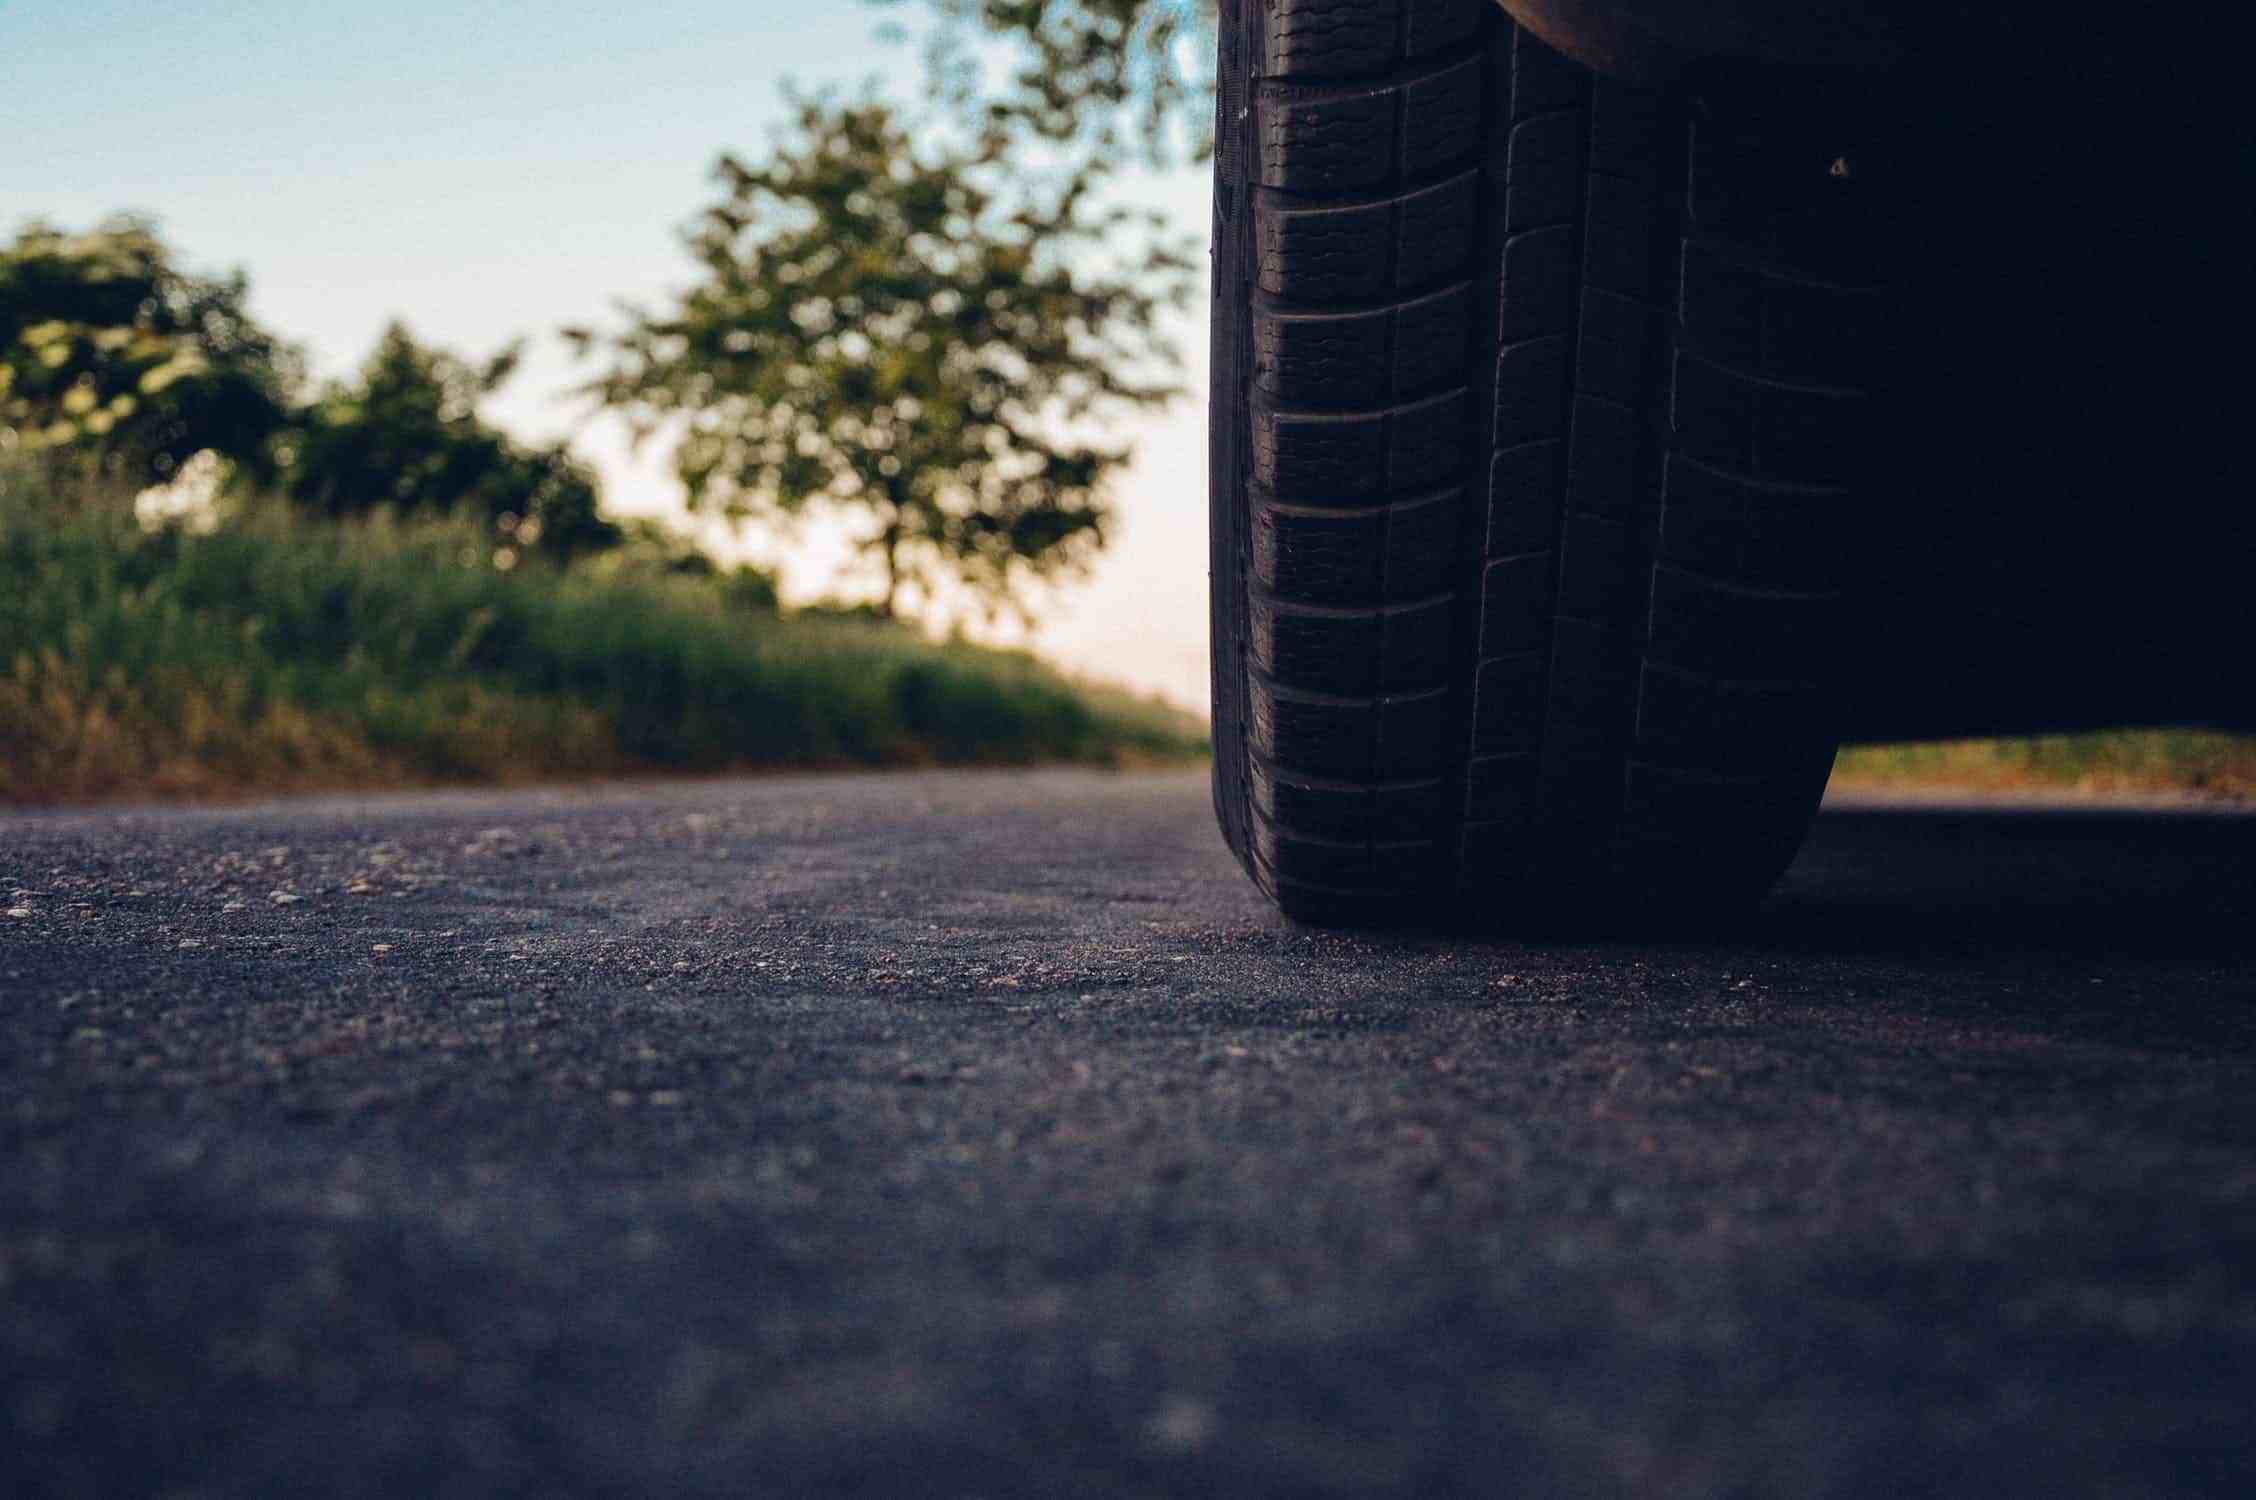 New Tires And Maintenance Services In Fort Collins